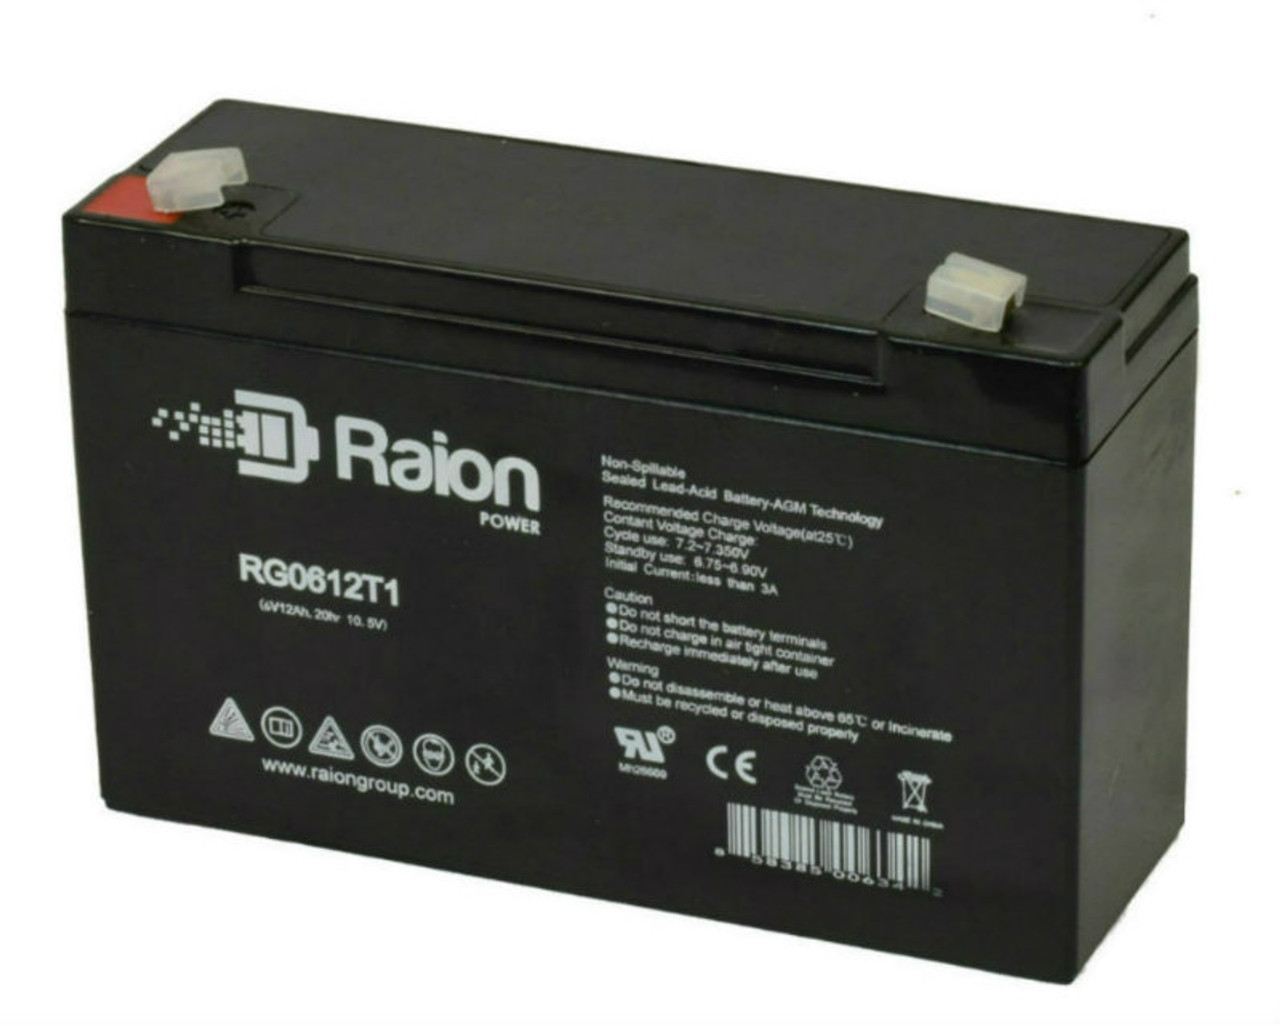 Raion Power RG06120T1 Replacement Emergency Light Battery for Portalac GS PE106R